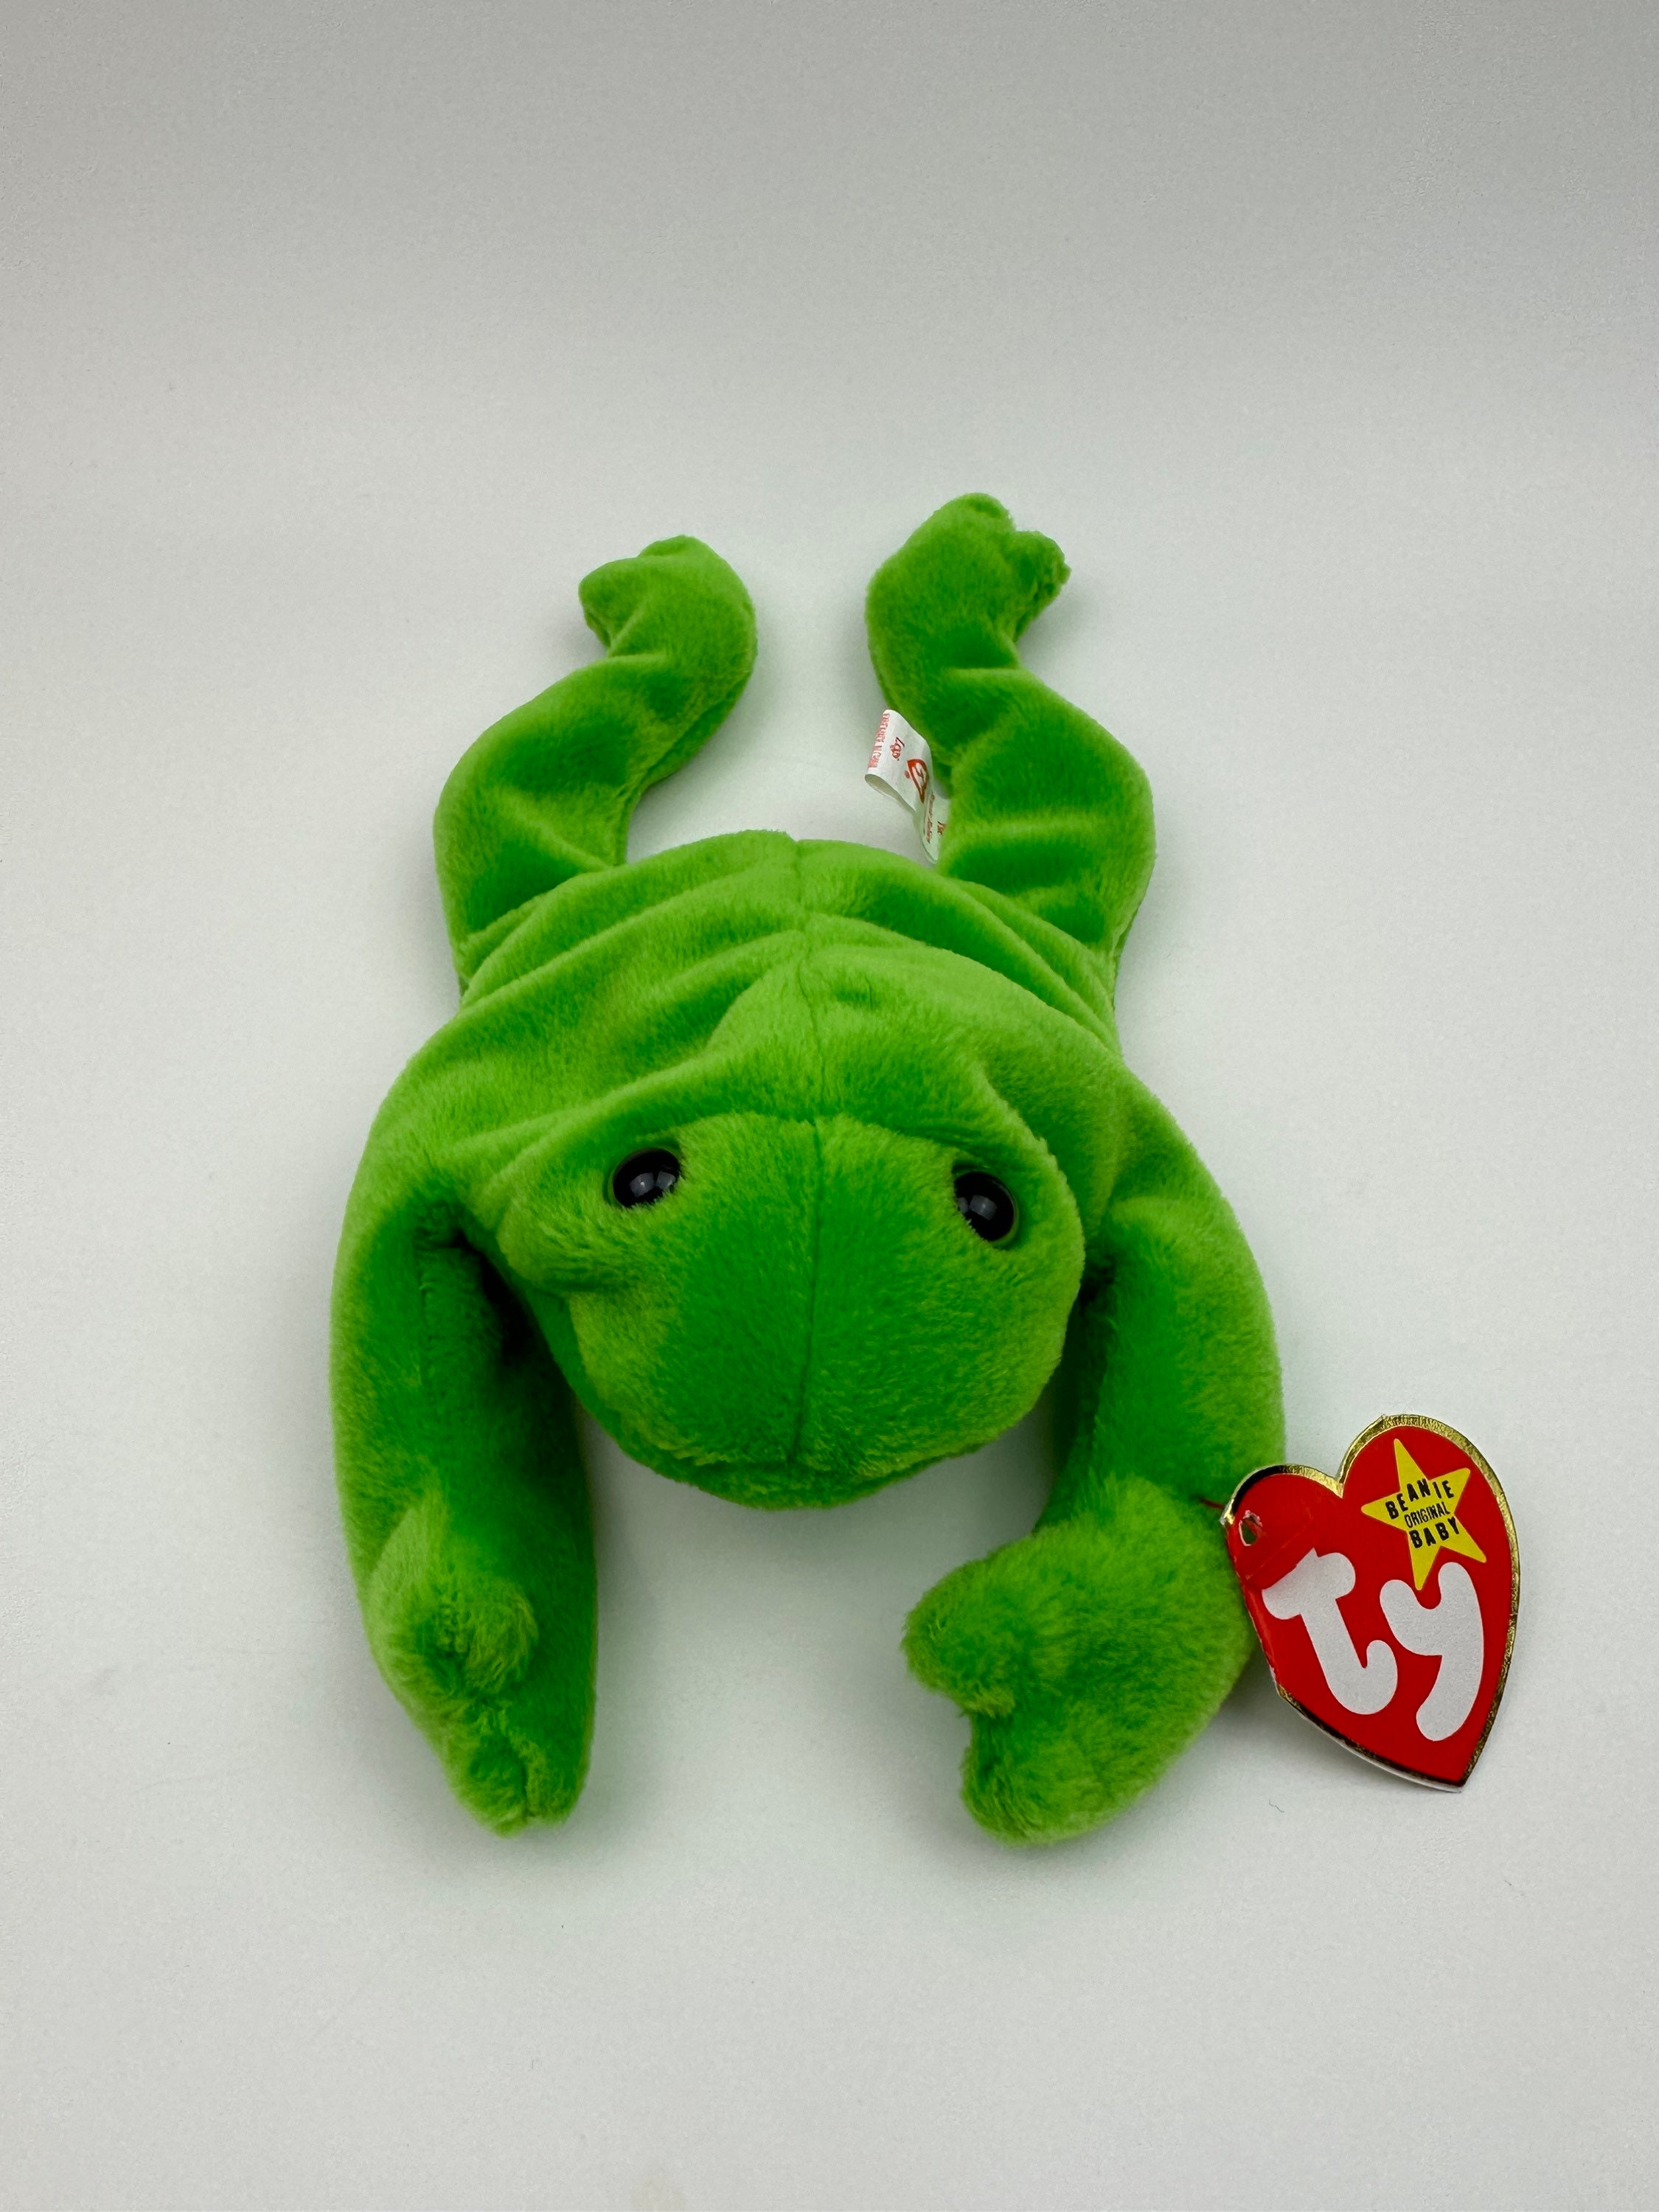 Ty Beanie Baby legs the Frog Highly Sought After Ty Classic 9 Inch